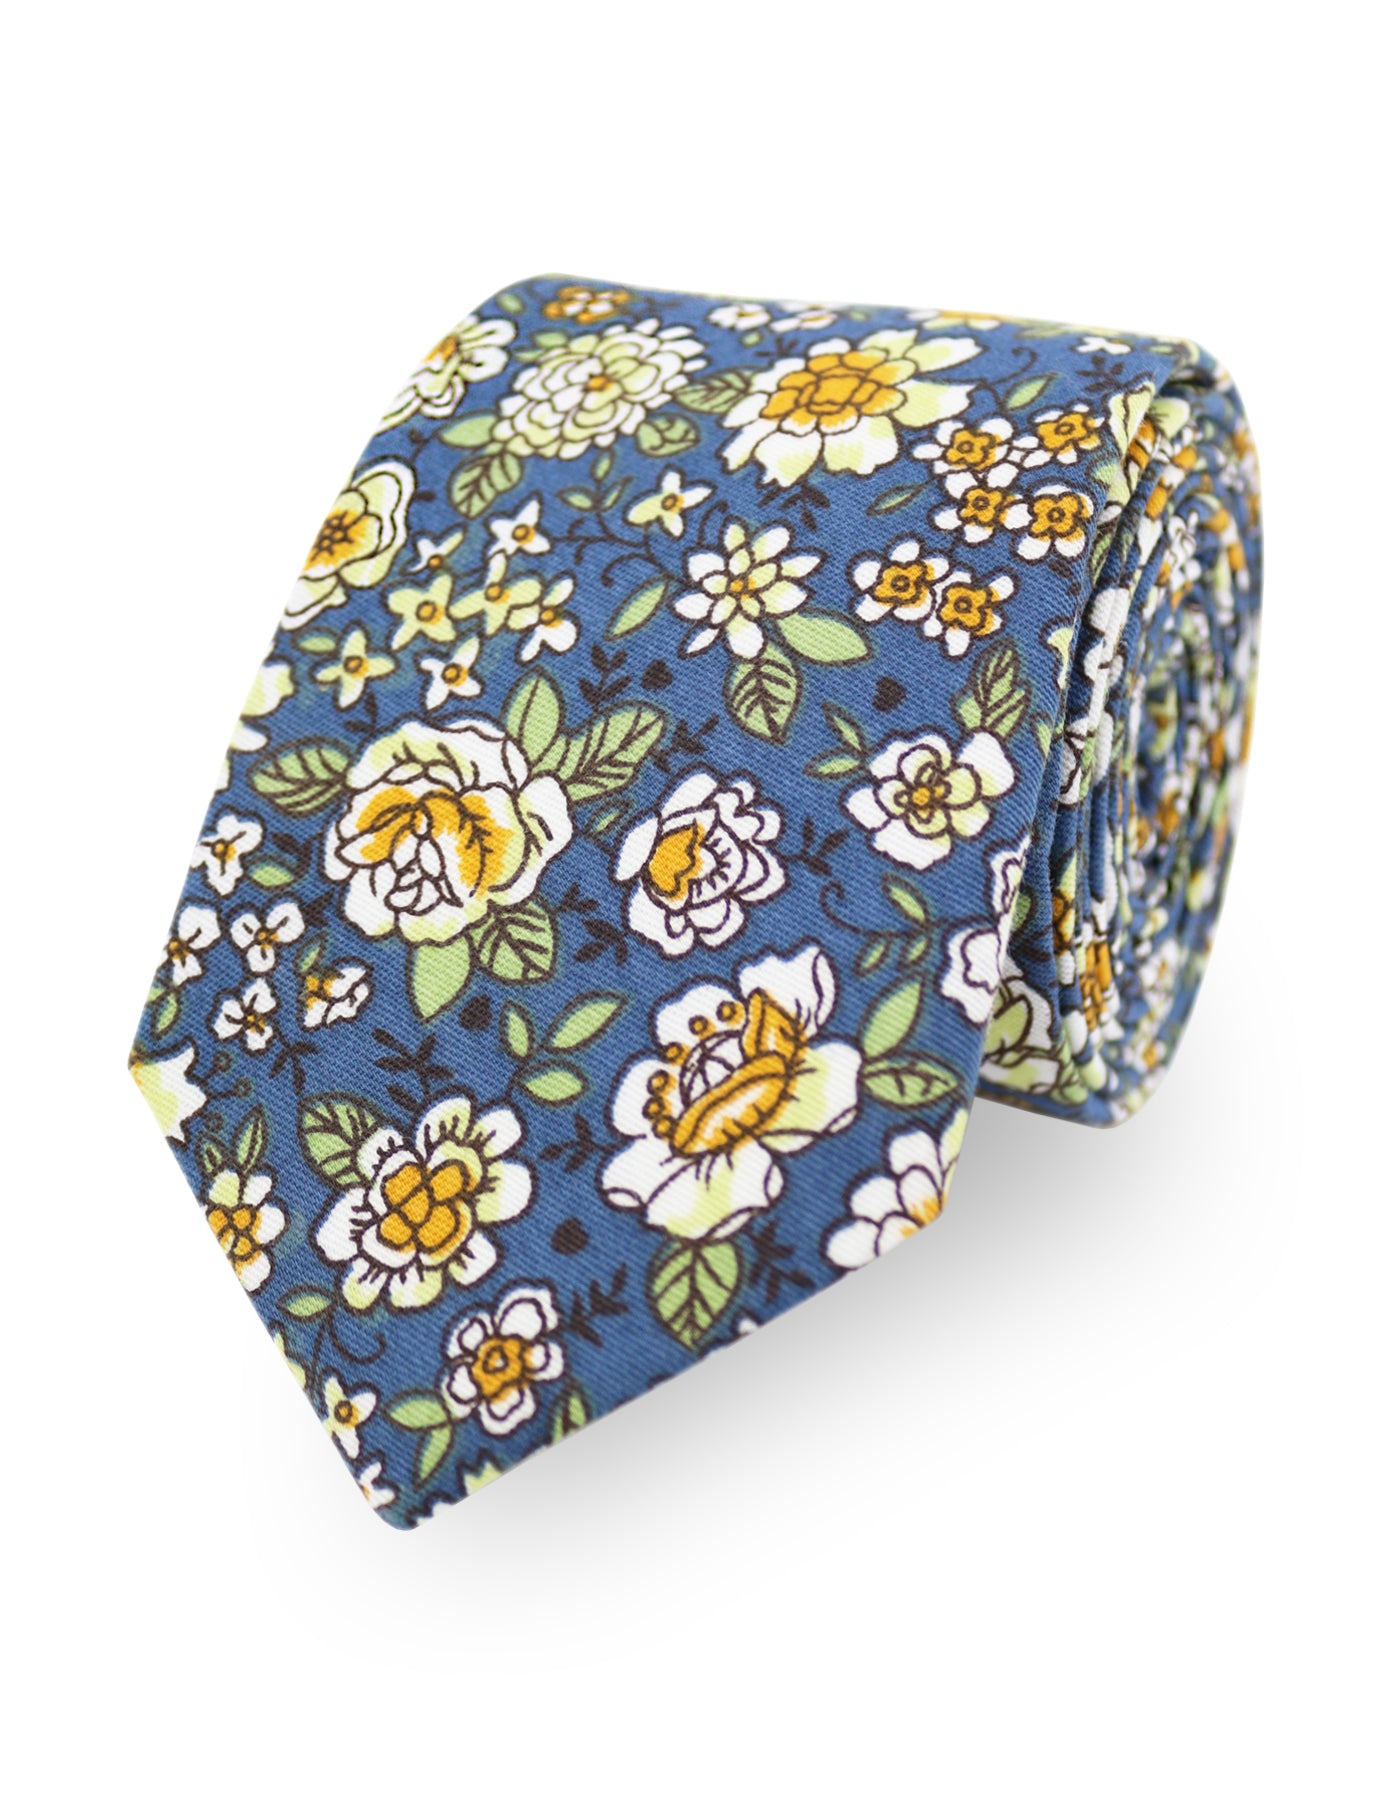 100% Cotton Floral Print Bow Tie - Blue & Yellow